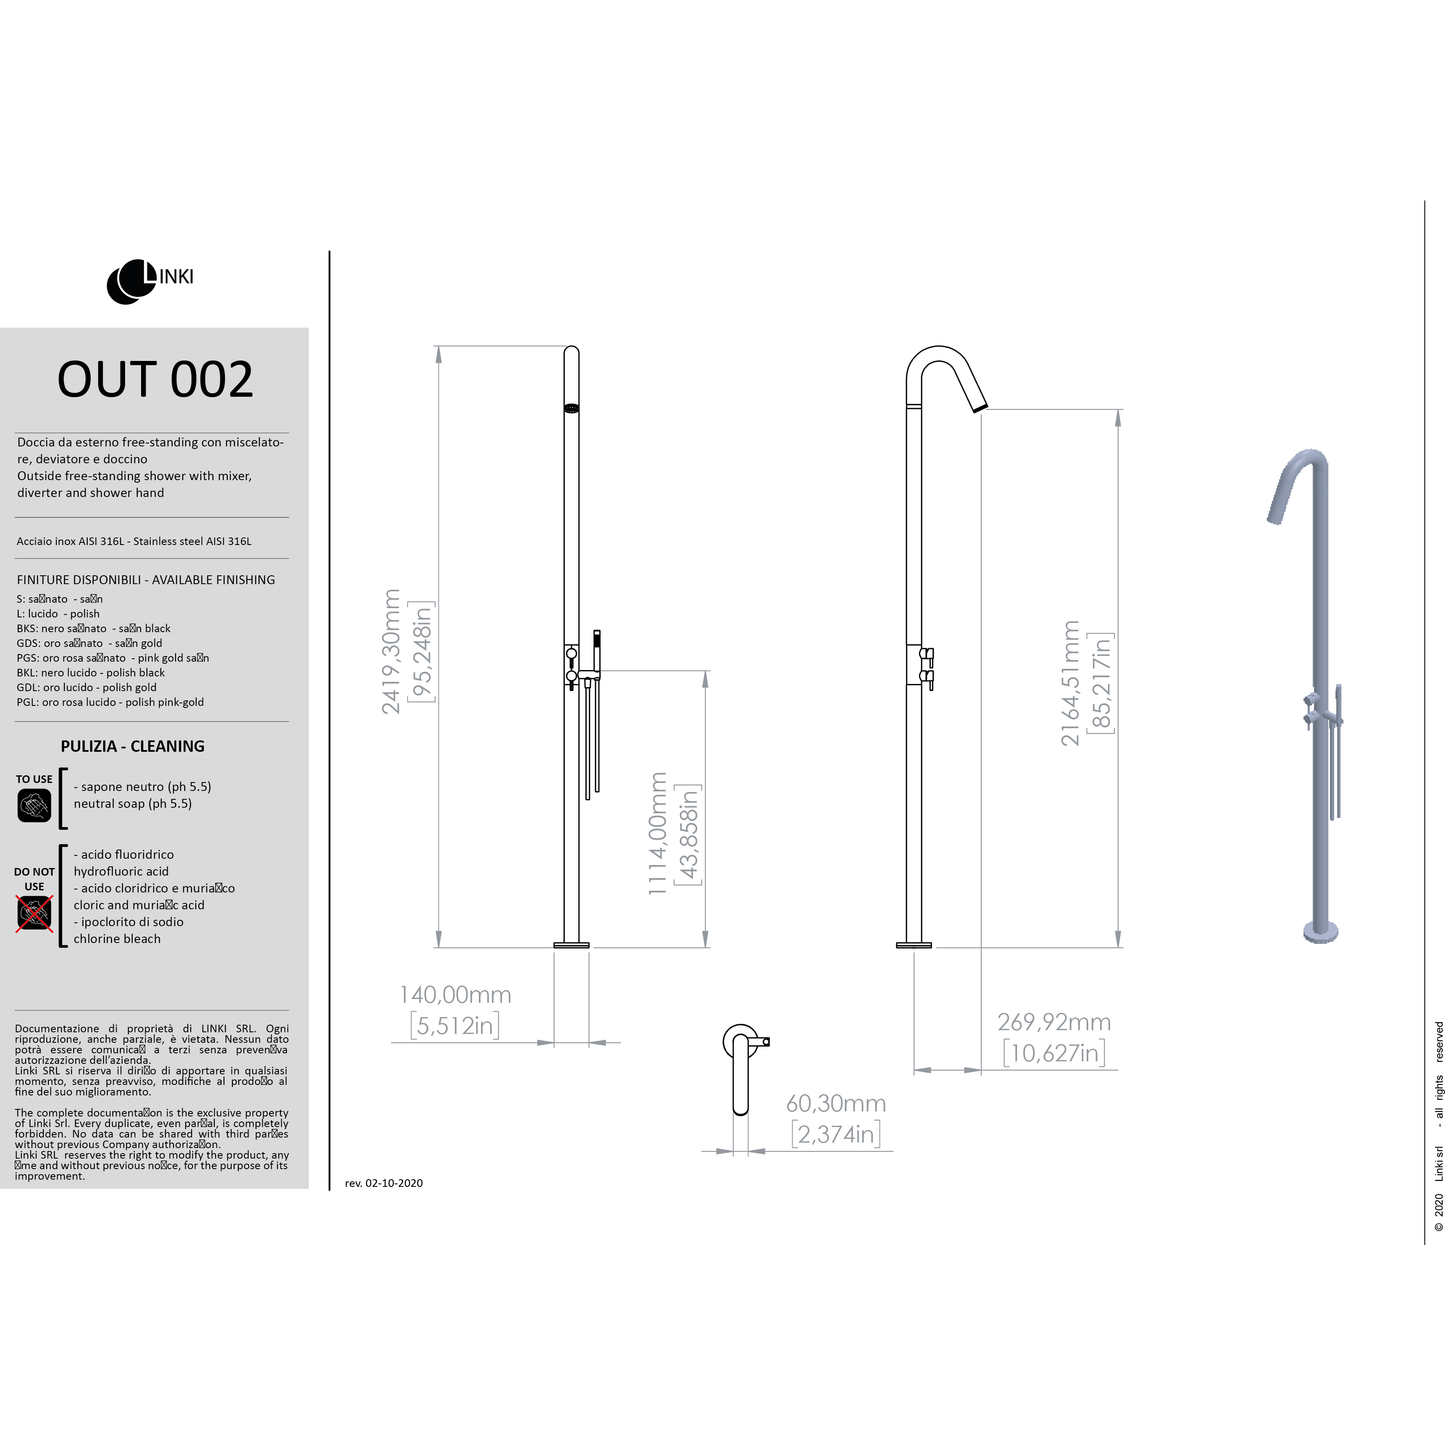 Outdoor freestanding shower with hand shower OUT002